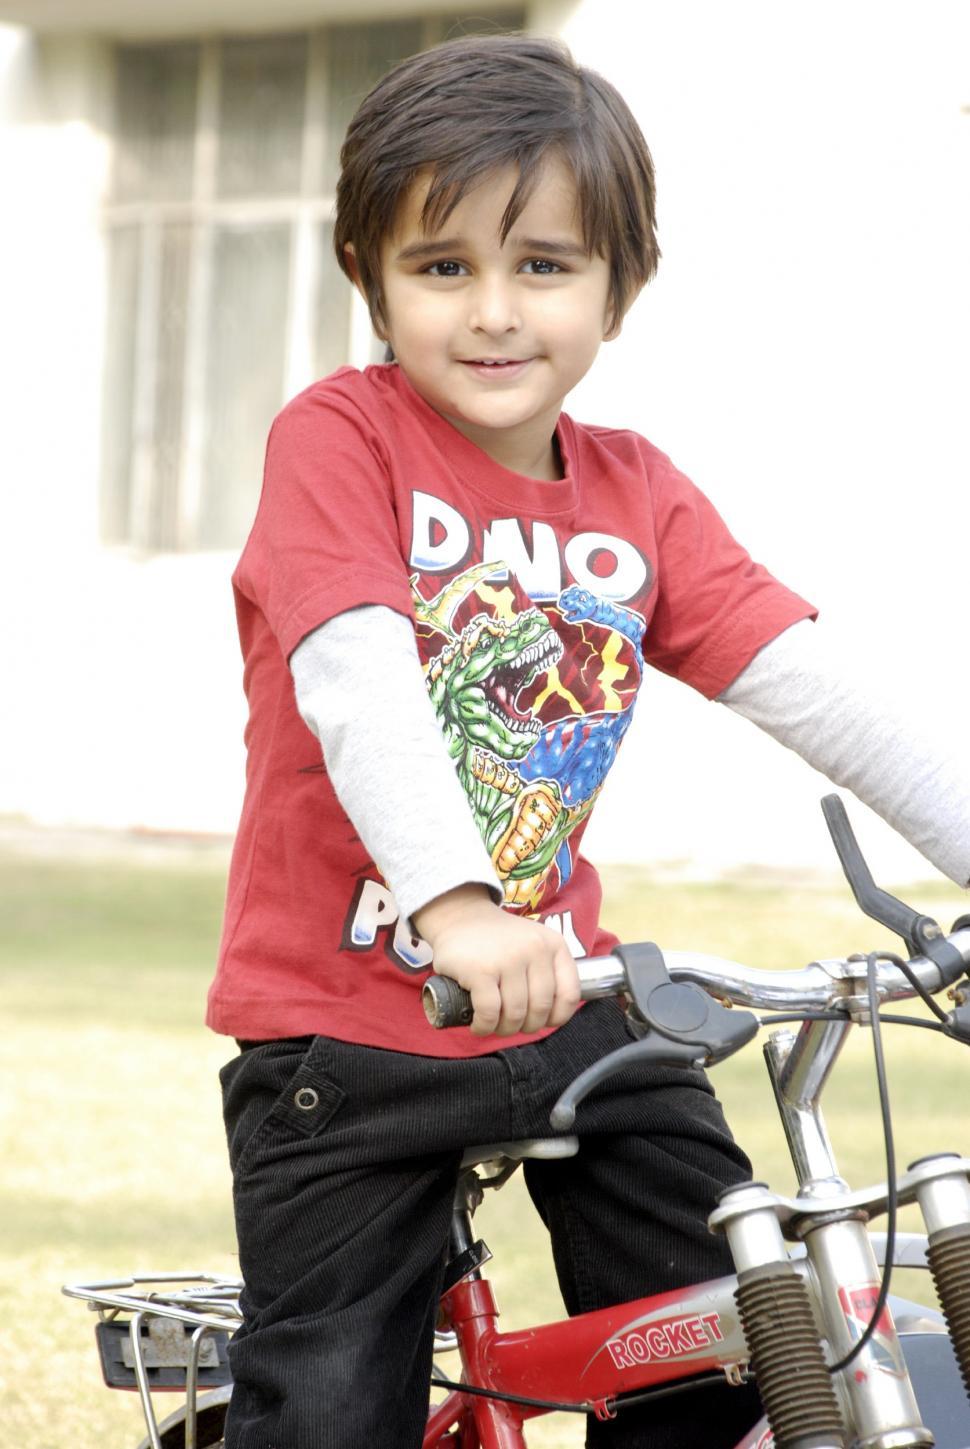 Free Image of Cute Kid with Bicycle 